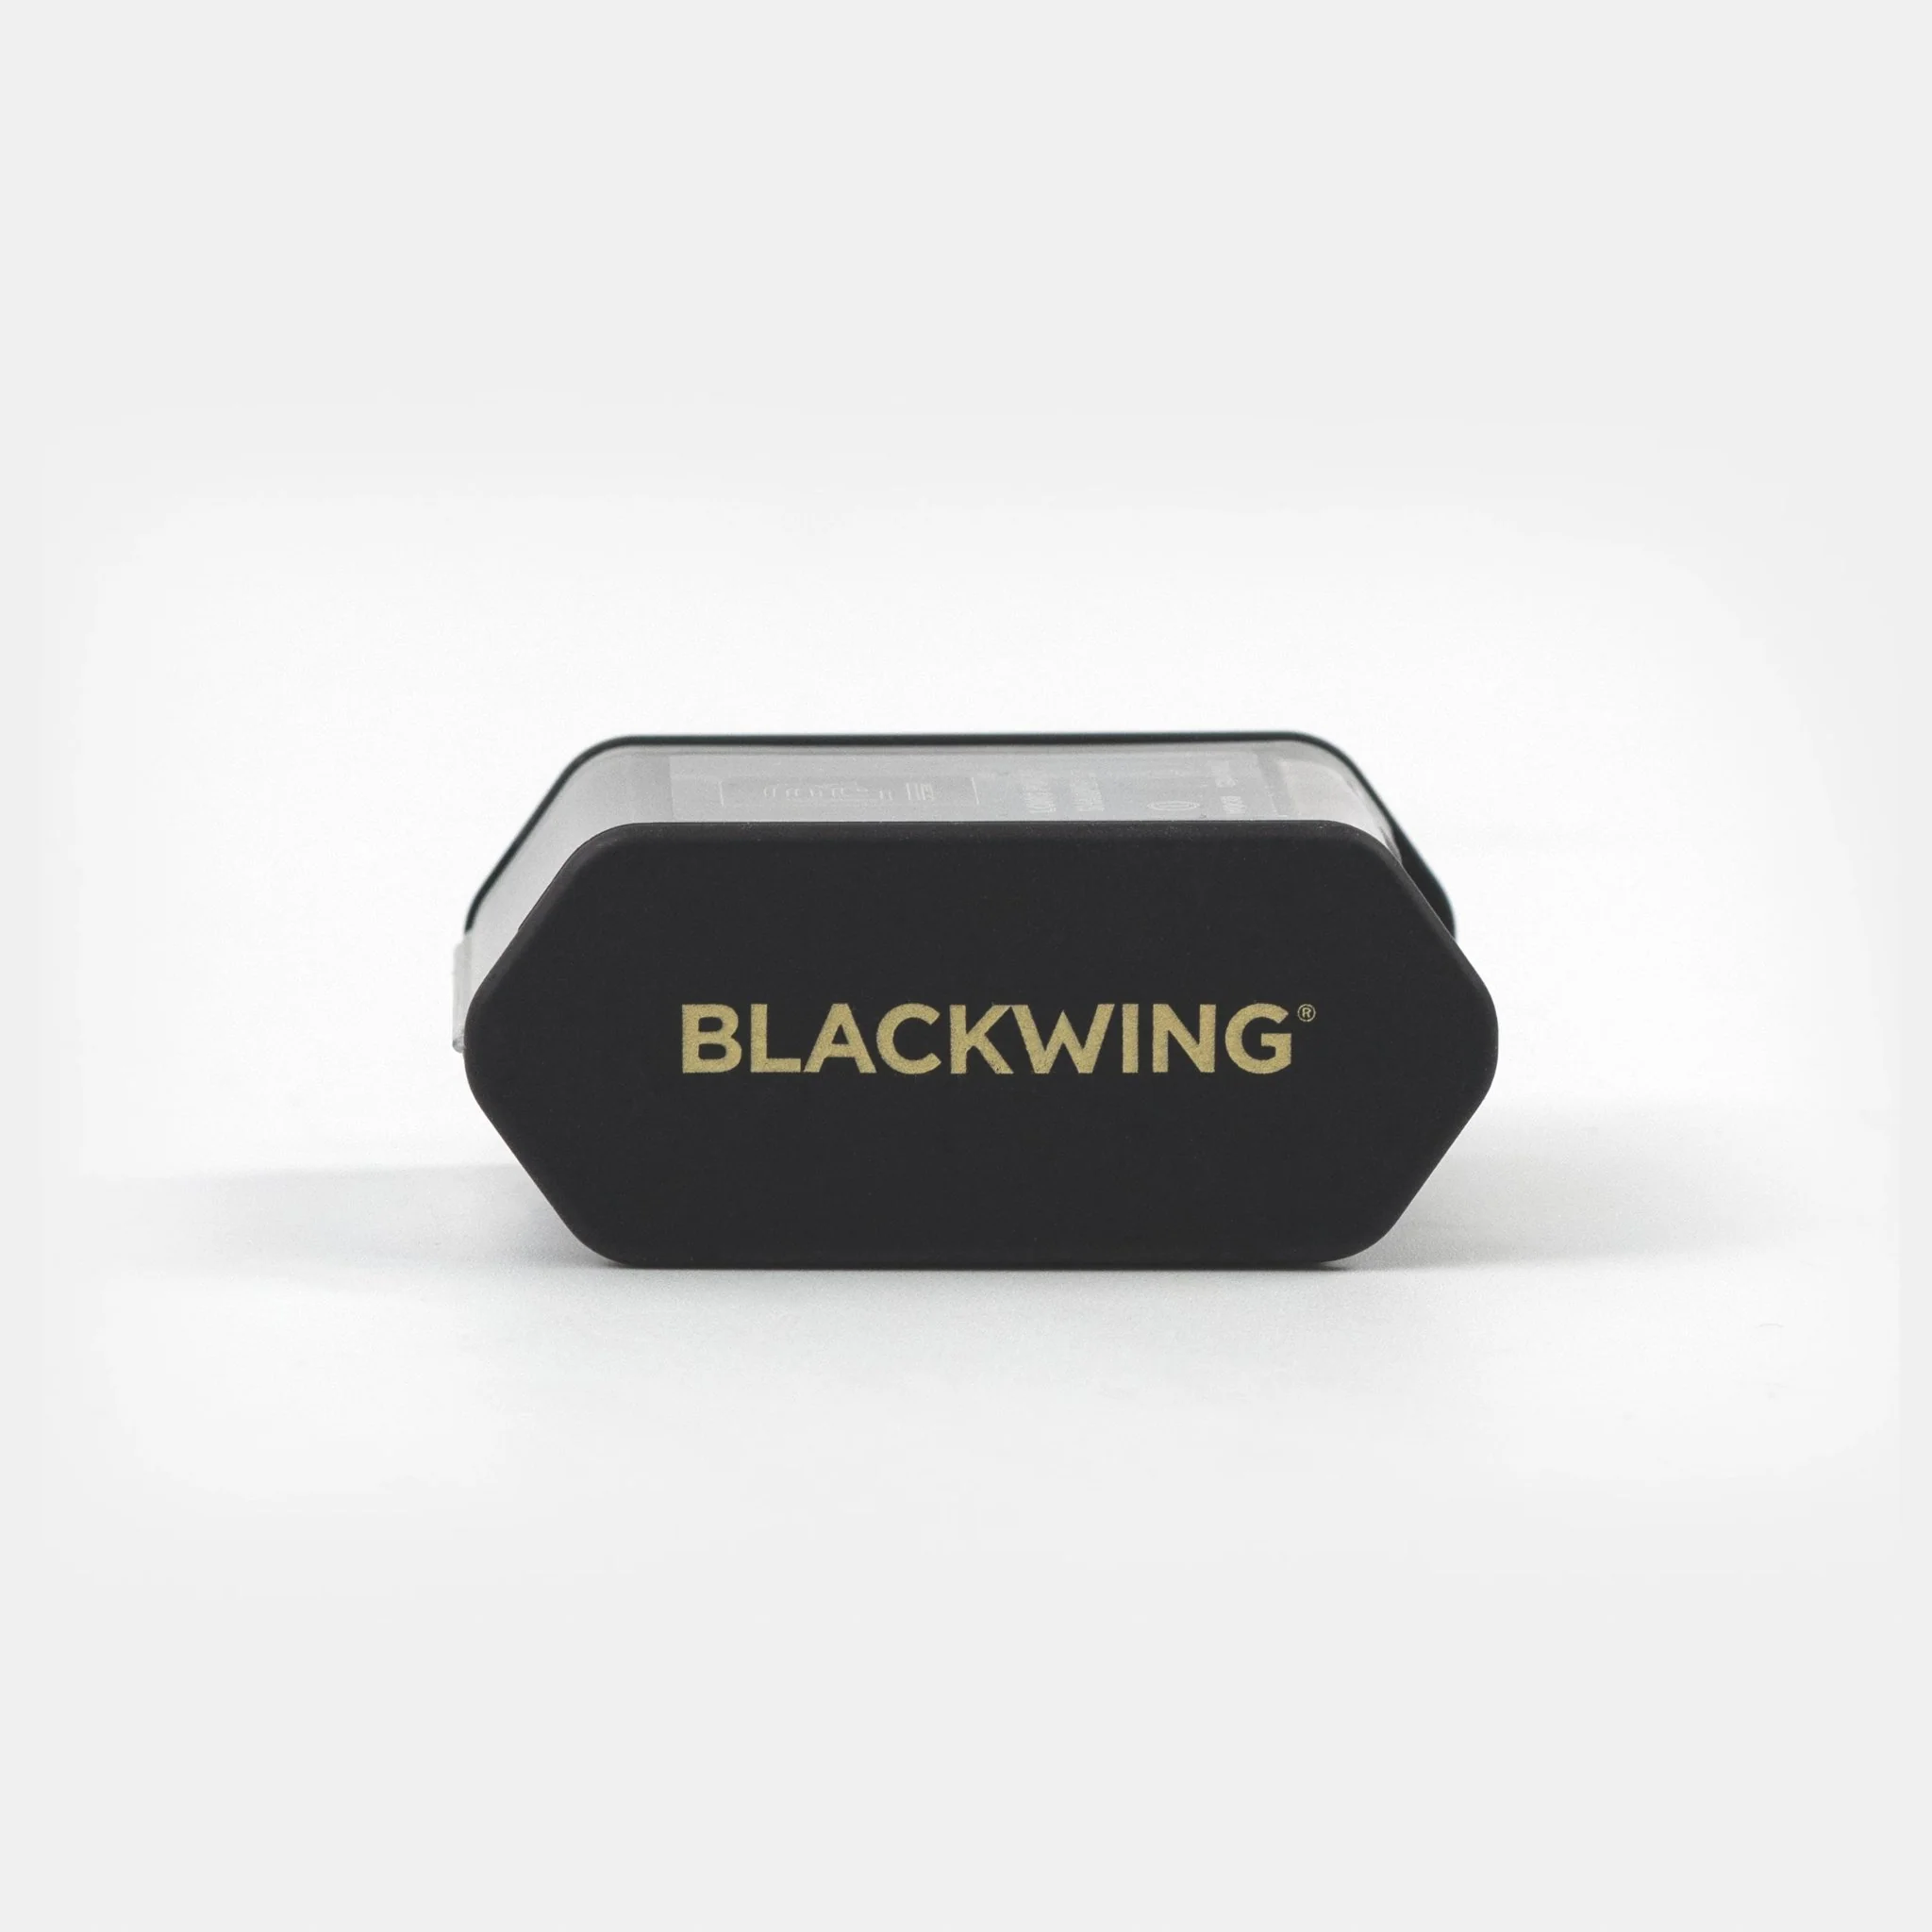 Blackwing Two Step Long Point Sharpener - Pencraft the boutique